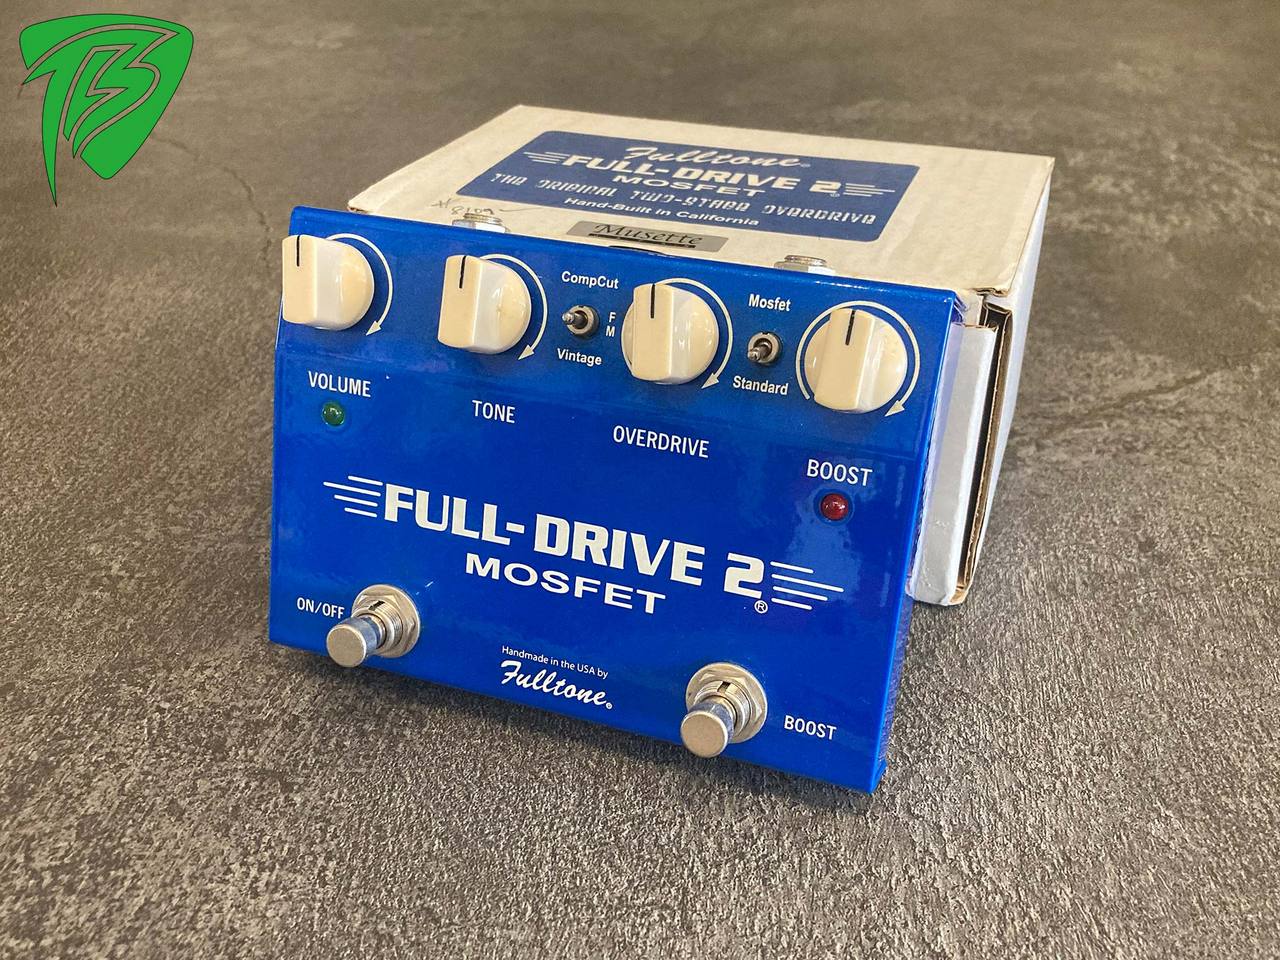 FULL-DRIVE 2 MOSFET